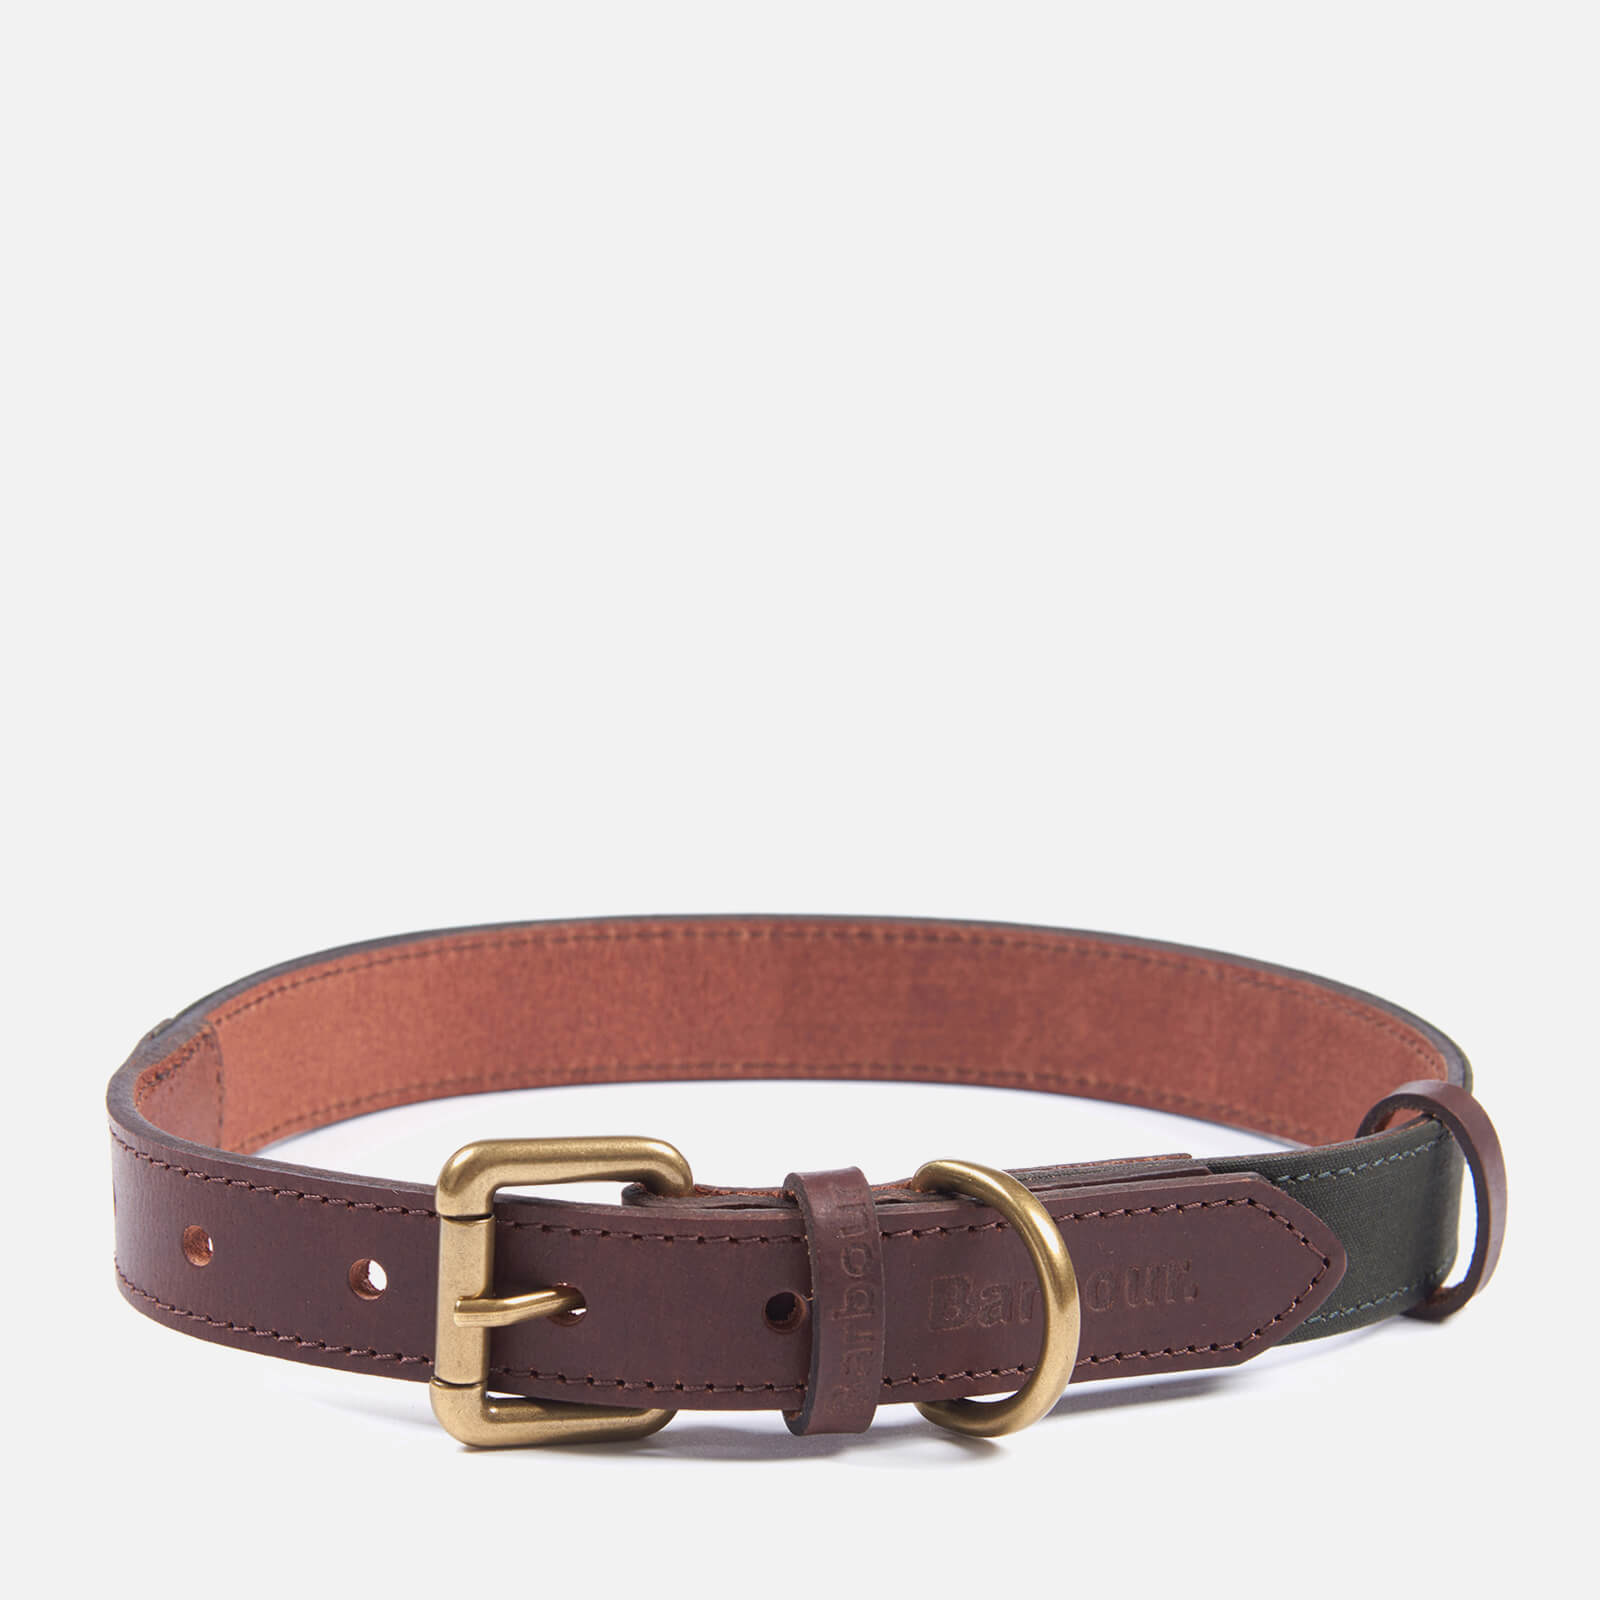 Barbour Wax/Leather Dog Collar - Olive - S